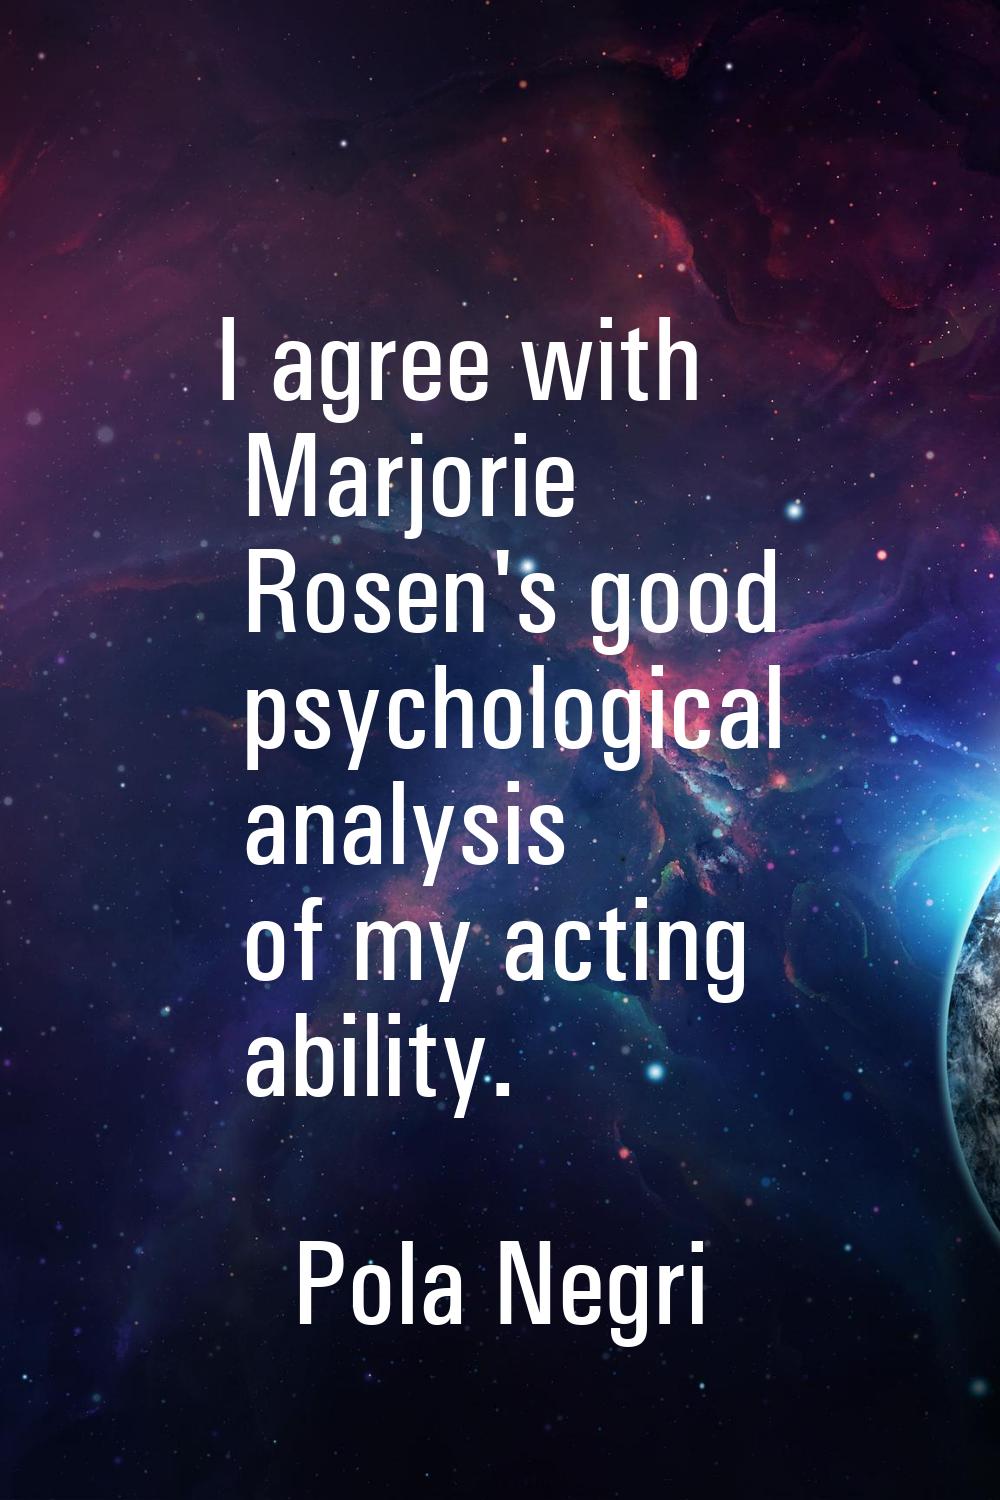 I agree with Marjorie Rosen's good psychological analysis of my acting ability.